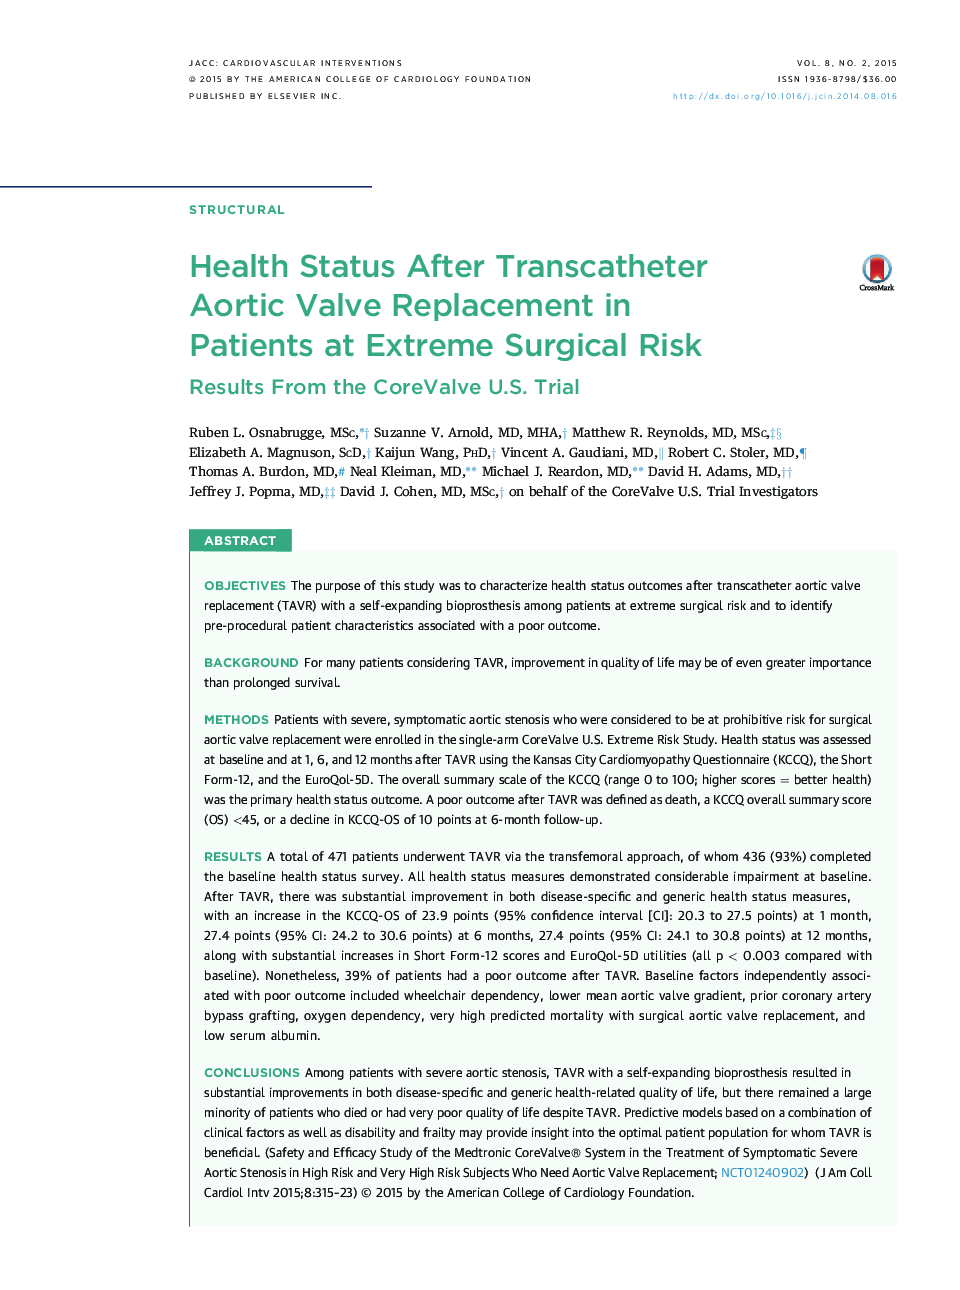 Health Status After Transcatheter AorticÂ Valve Replacement in PatientsÂ atÂ Extreme Surgical Risk: Results From the CoreValve U.S. Trial